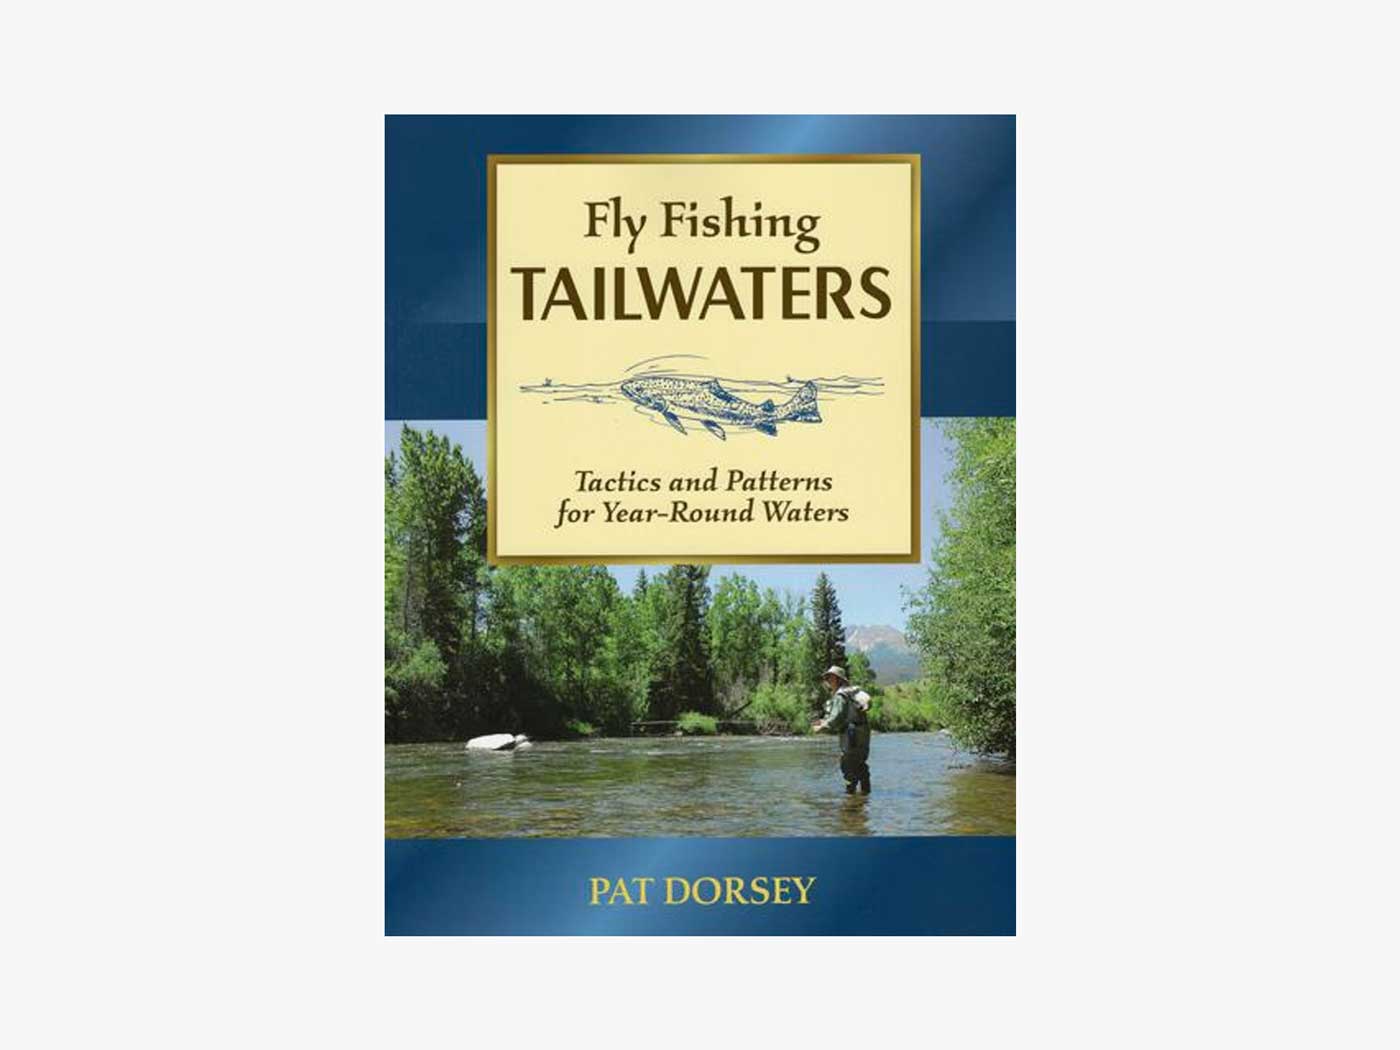 Fly Fishing Tailwaters: Tactics and Patterns for Year-Round Waters [Book]